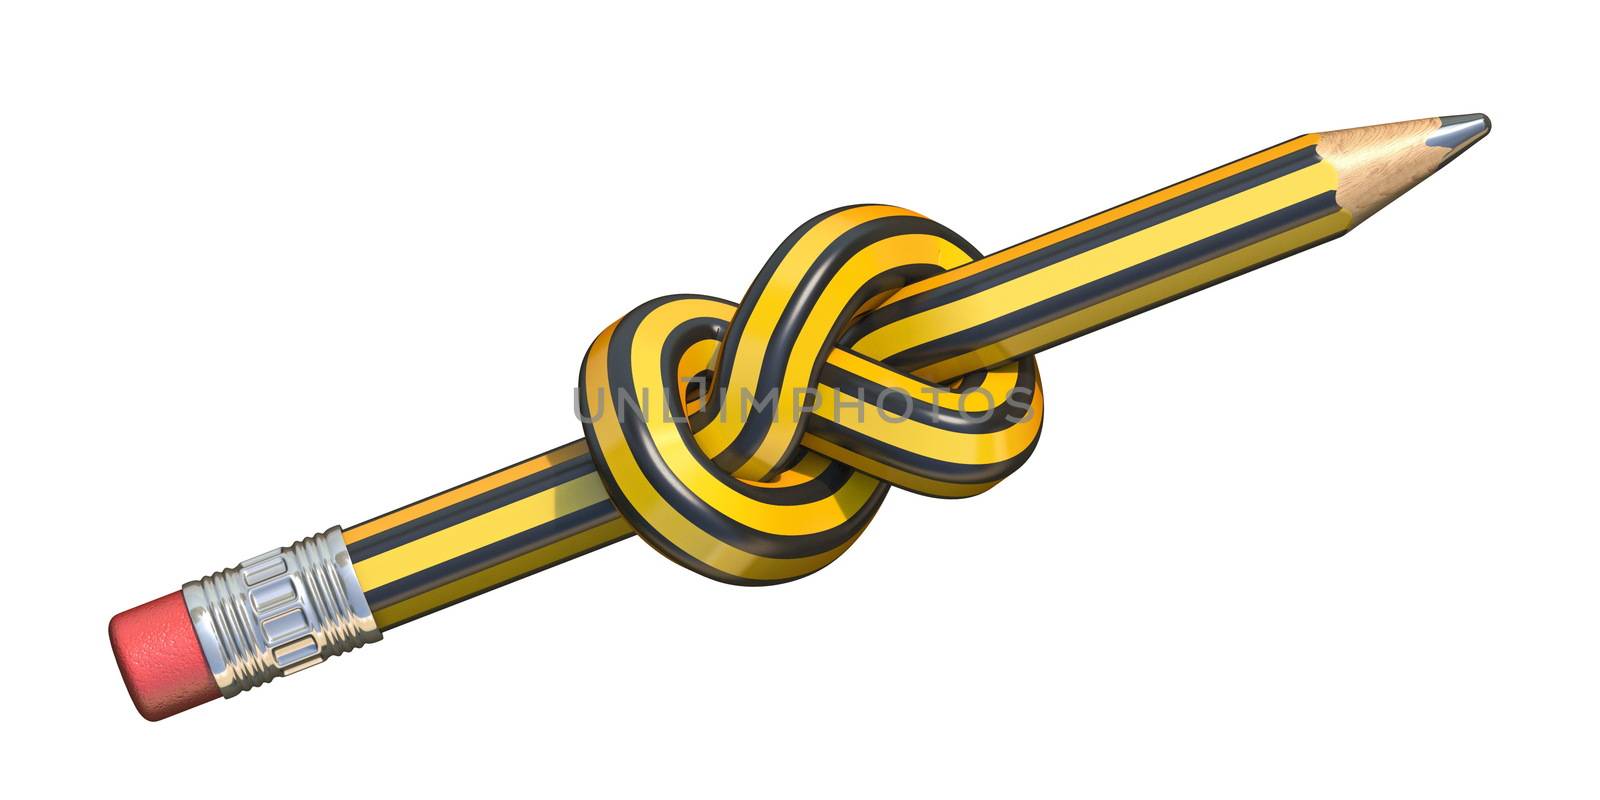 Pencil knot 3D by djmilic